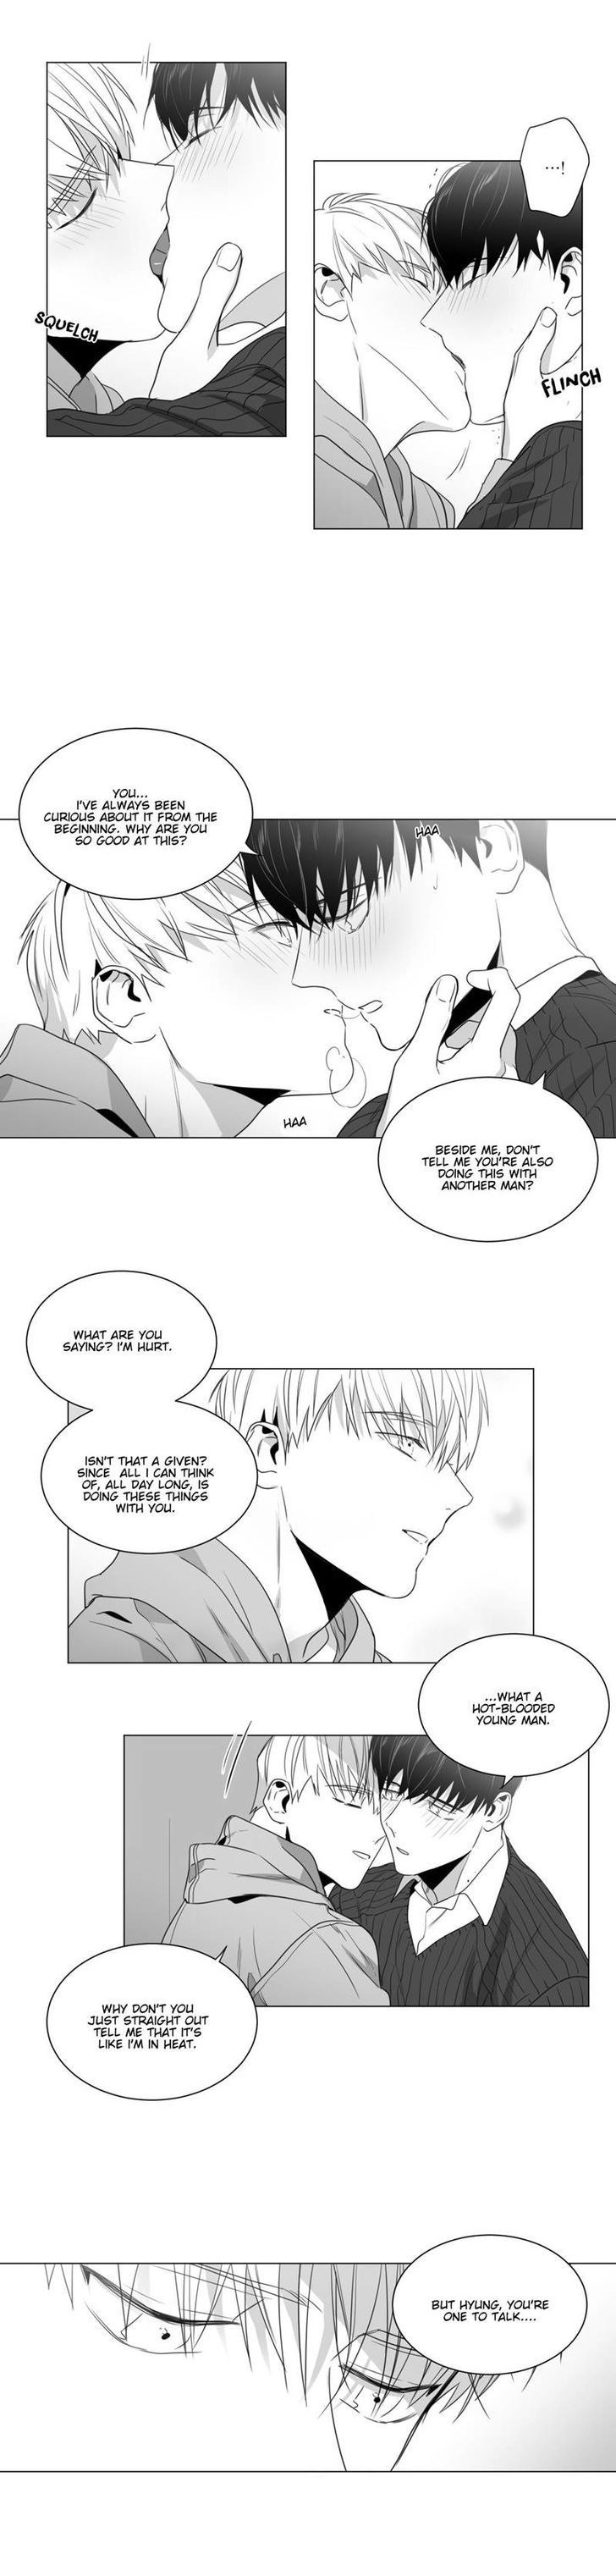 Lover Boy (Lezhin) Chapter 029 page 3